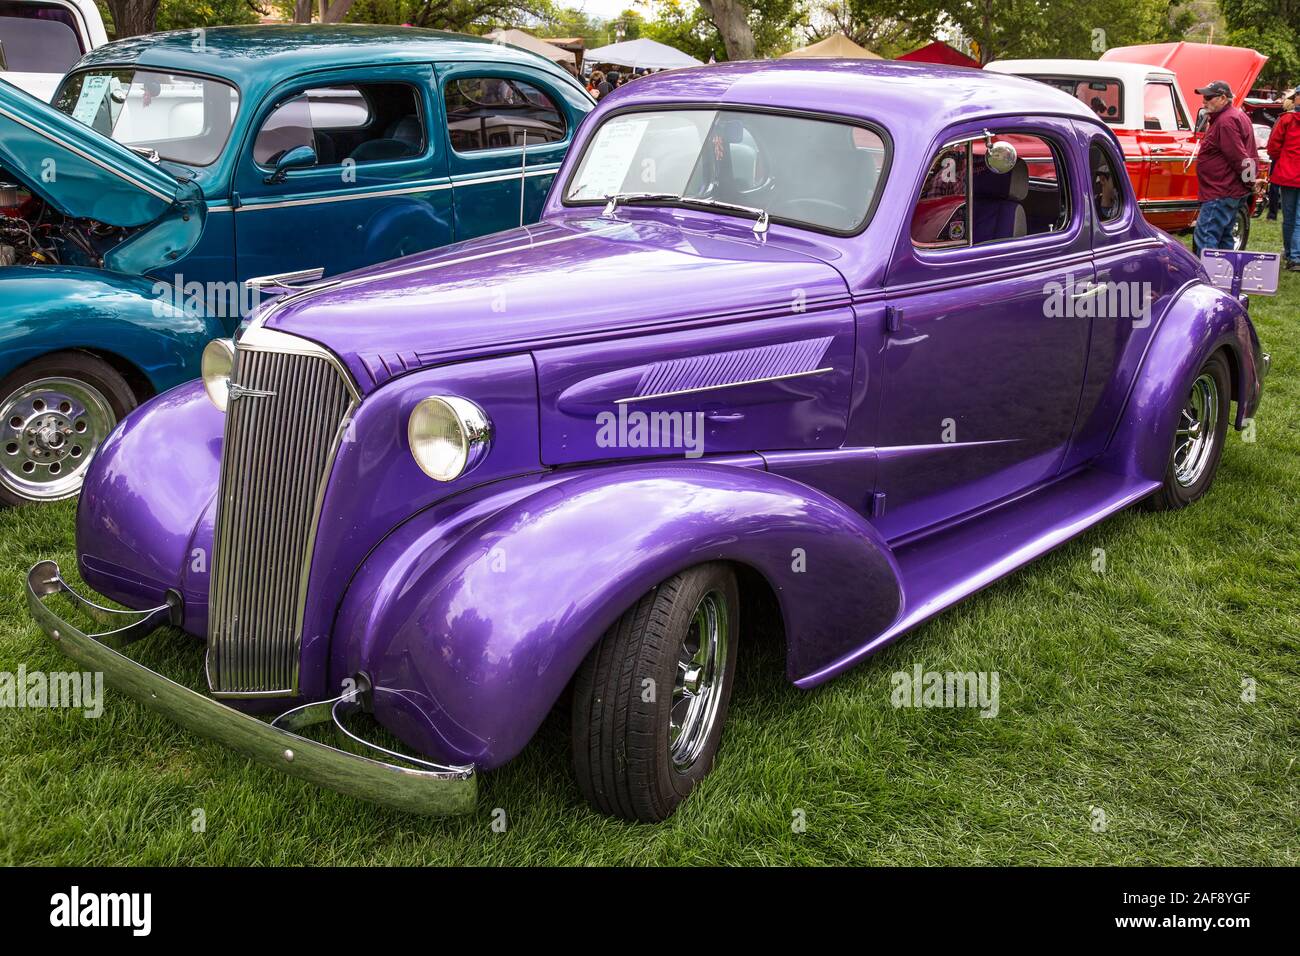 A restored and modified 1937 Chevrolet Coupe in the Moab April Action Car Show in Moab, Utah. Stock Photo